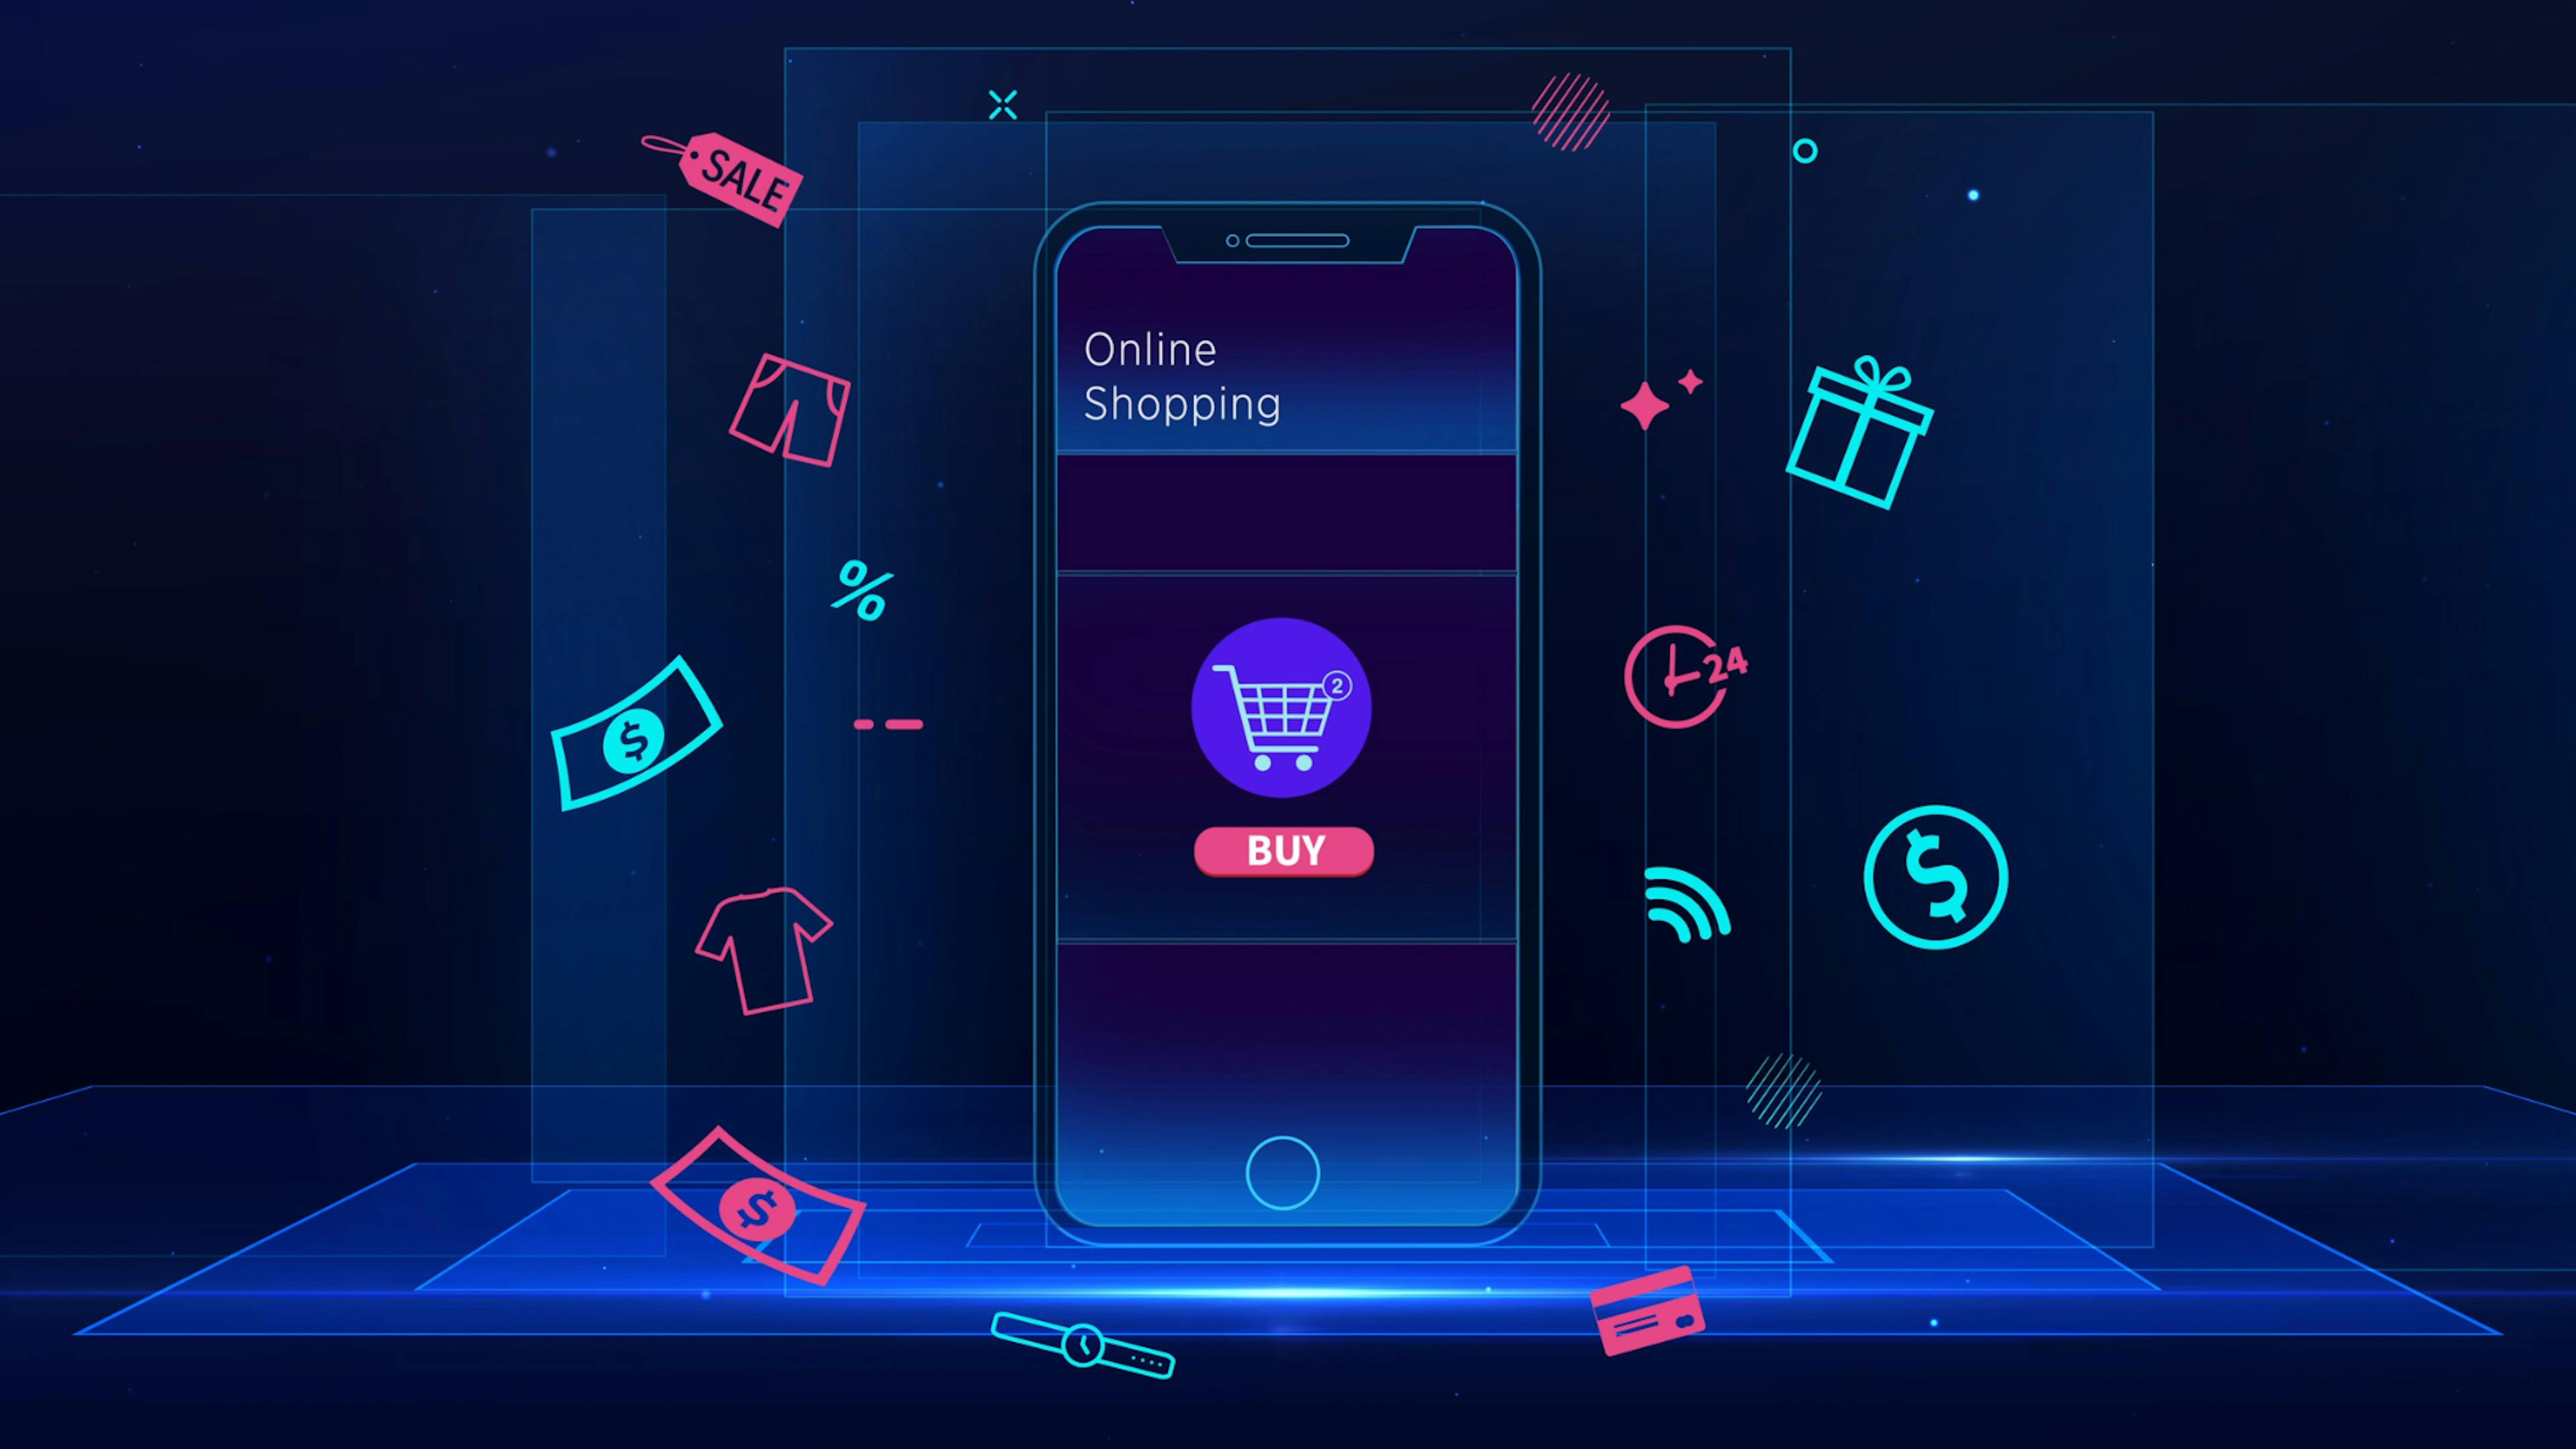 Minimal symbols about online shopping, and payment methods on a blue background and theme. 